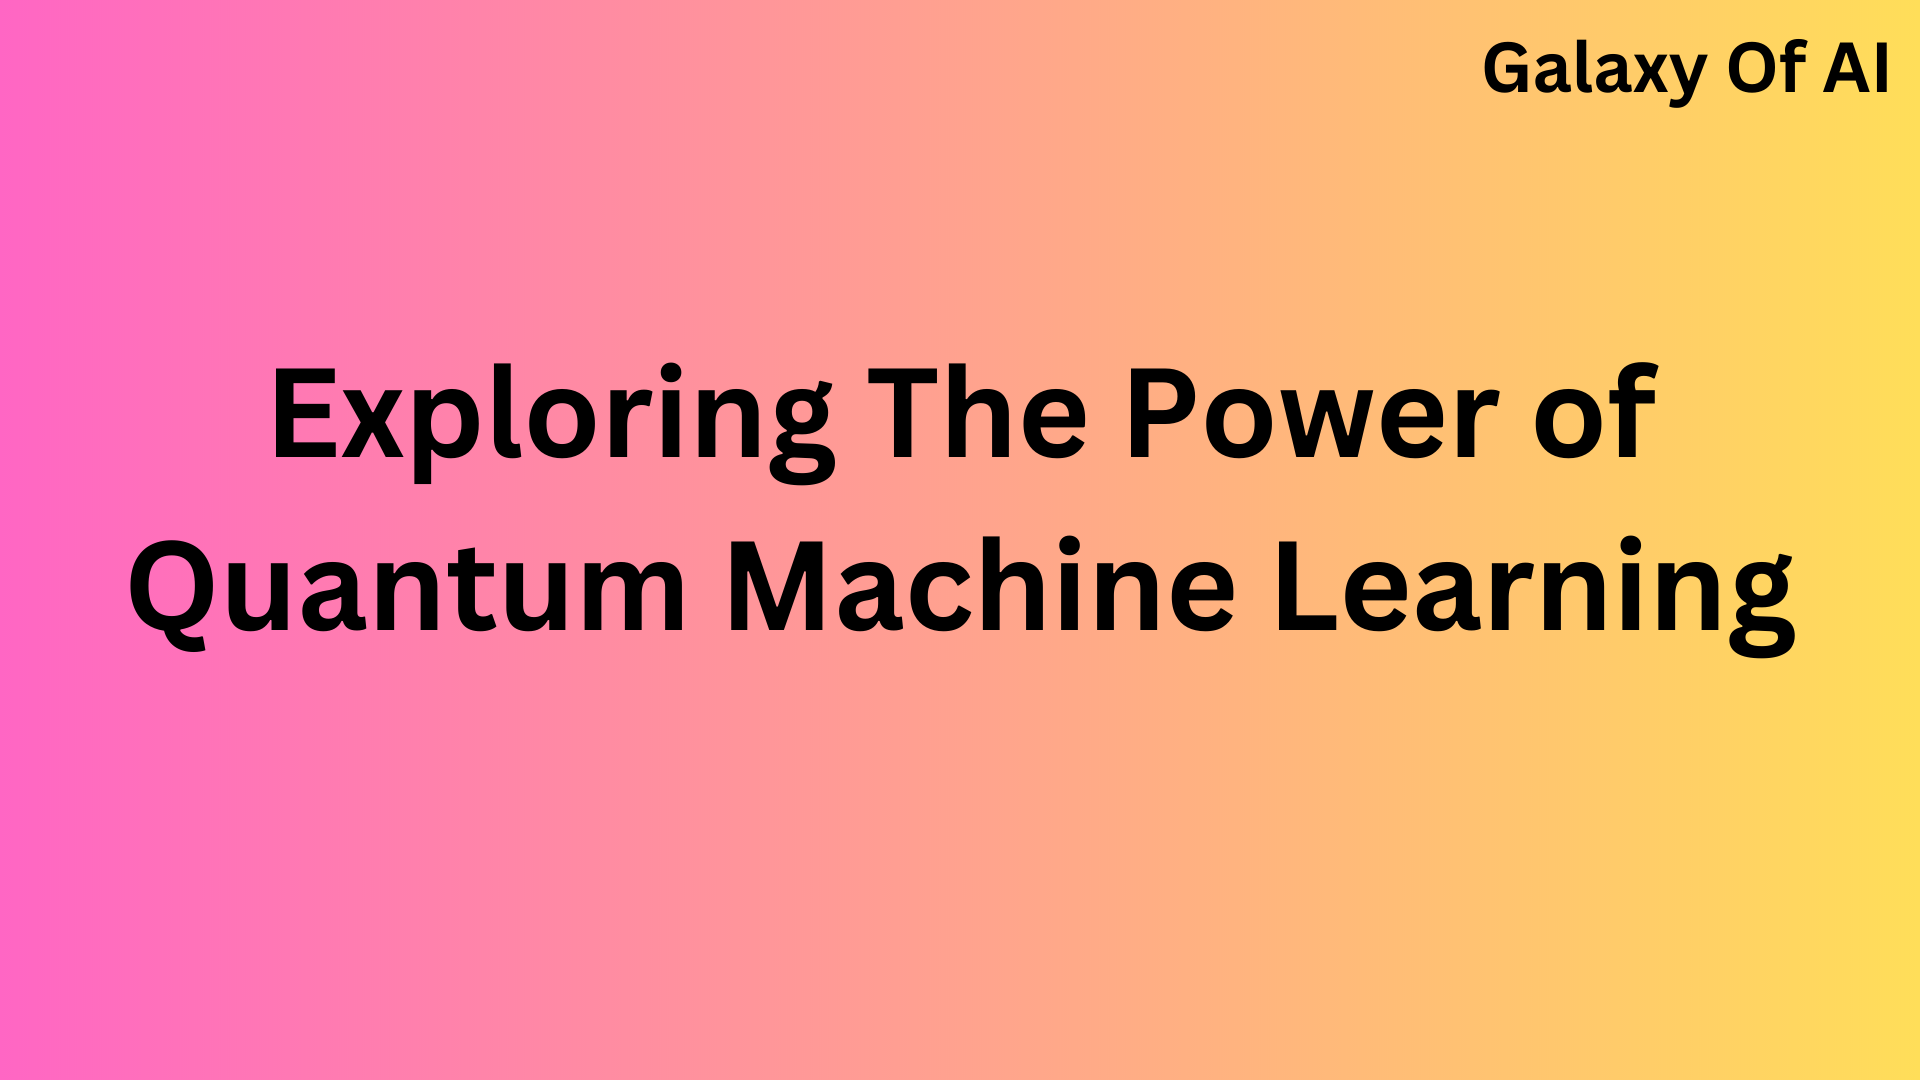 Exploring The Power of Quantum Machine Learning